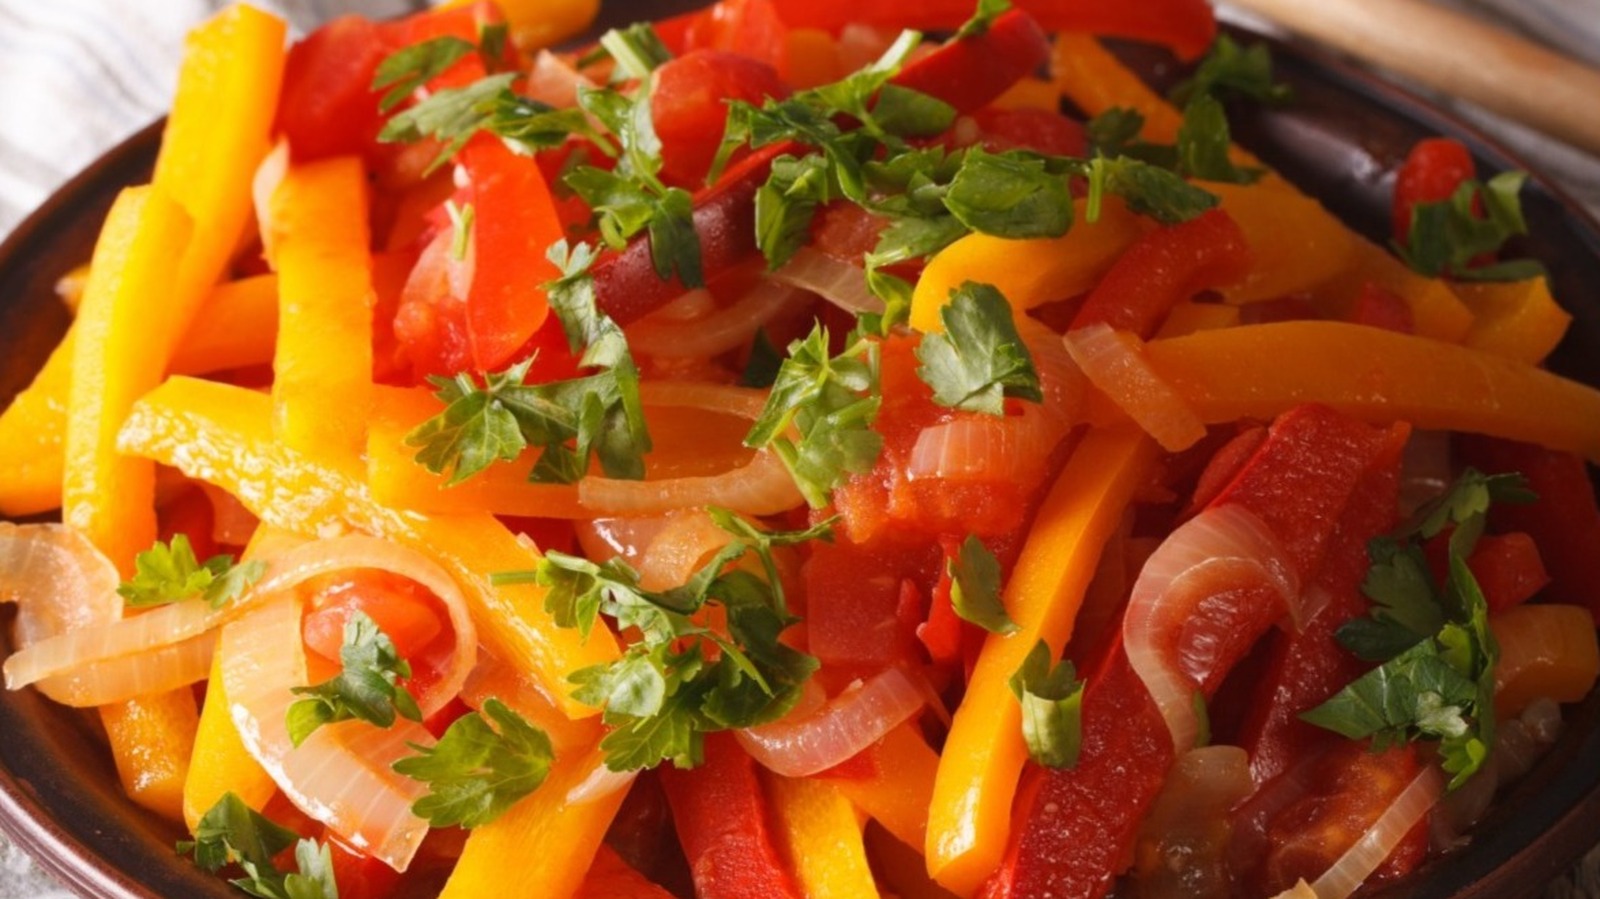 What Is Piperade And What Does It Taste Like?